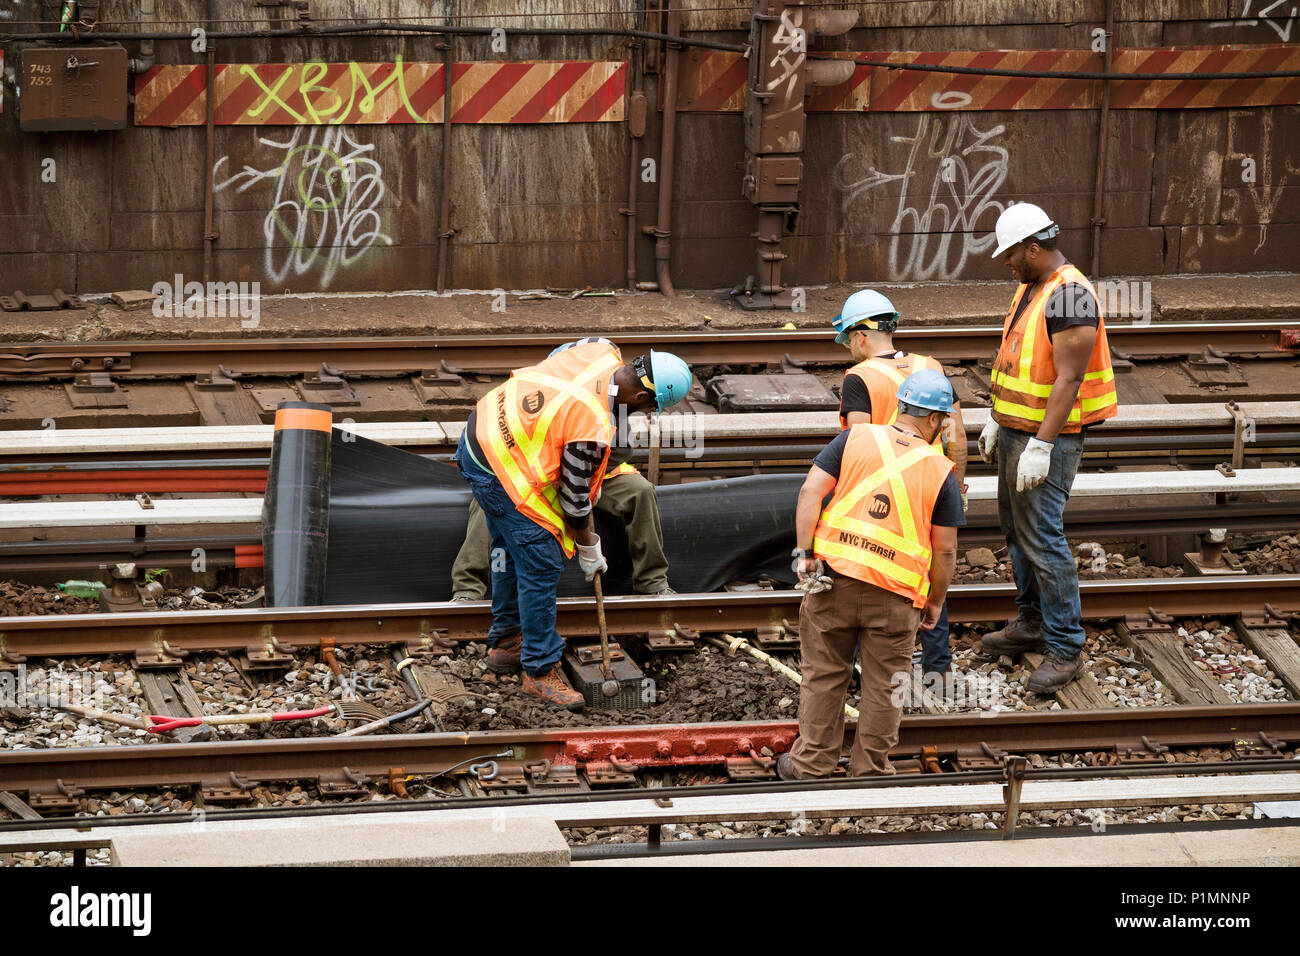 126th Street New York USA. Railroad workers working on the track. 2018 Stock Photo